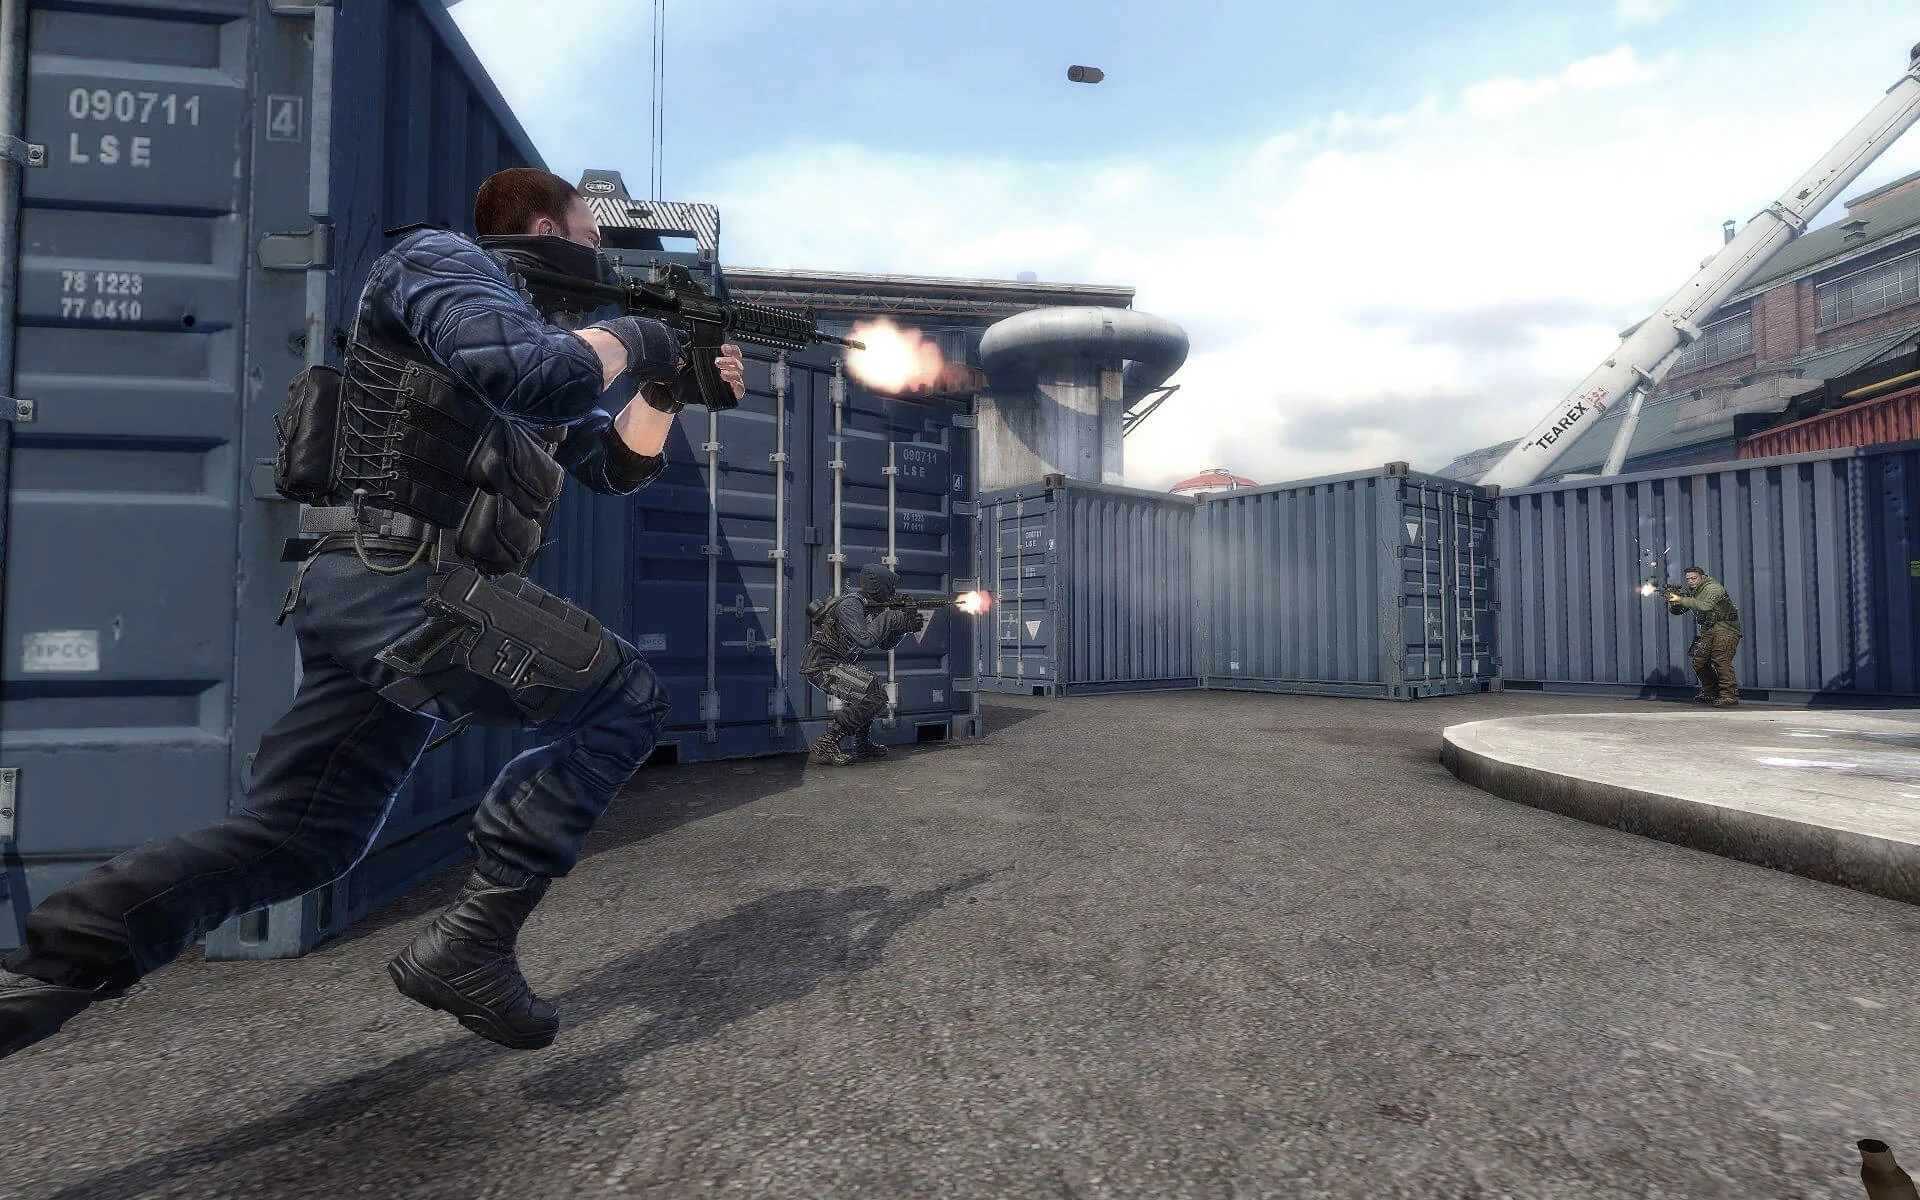 In Counter-Strike 2, the graphics will affect the gameplay